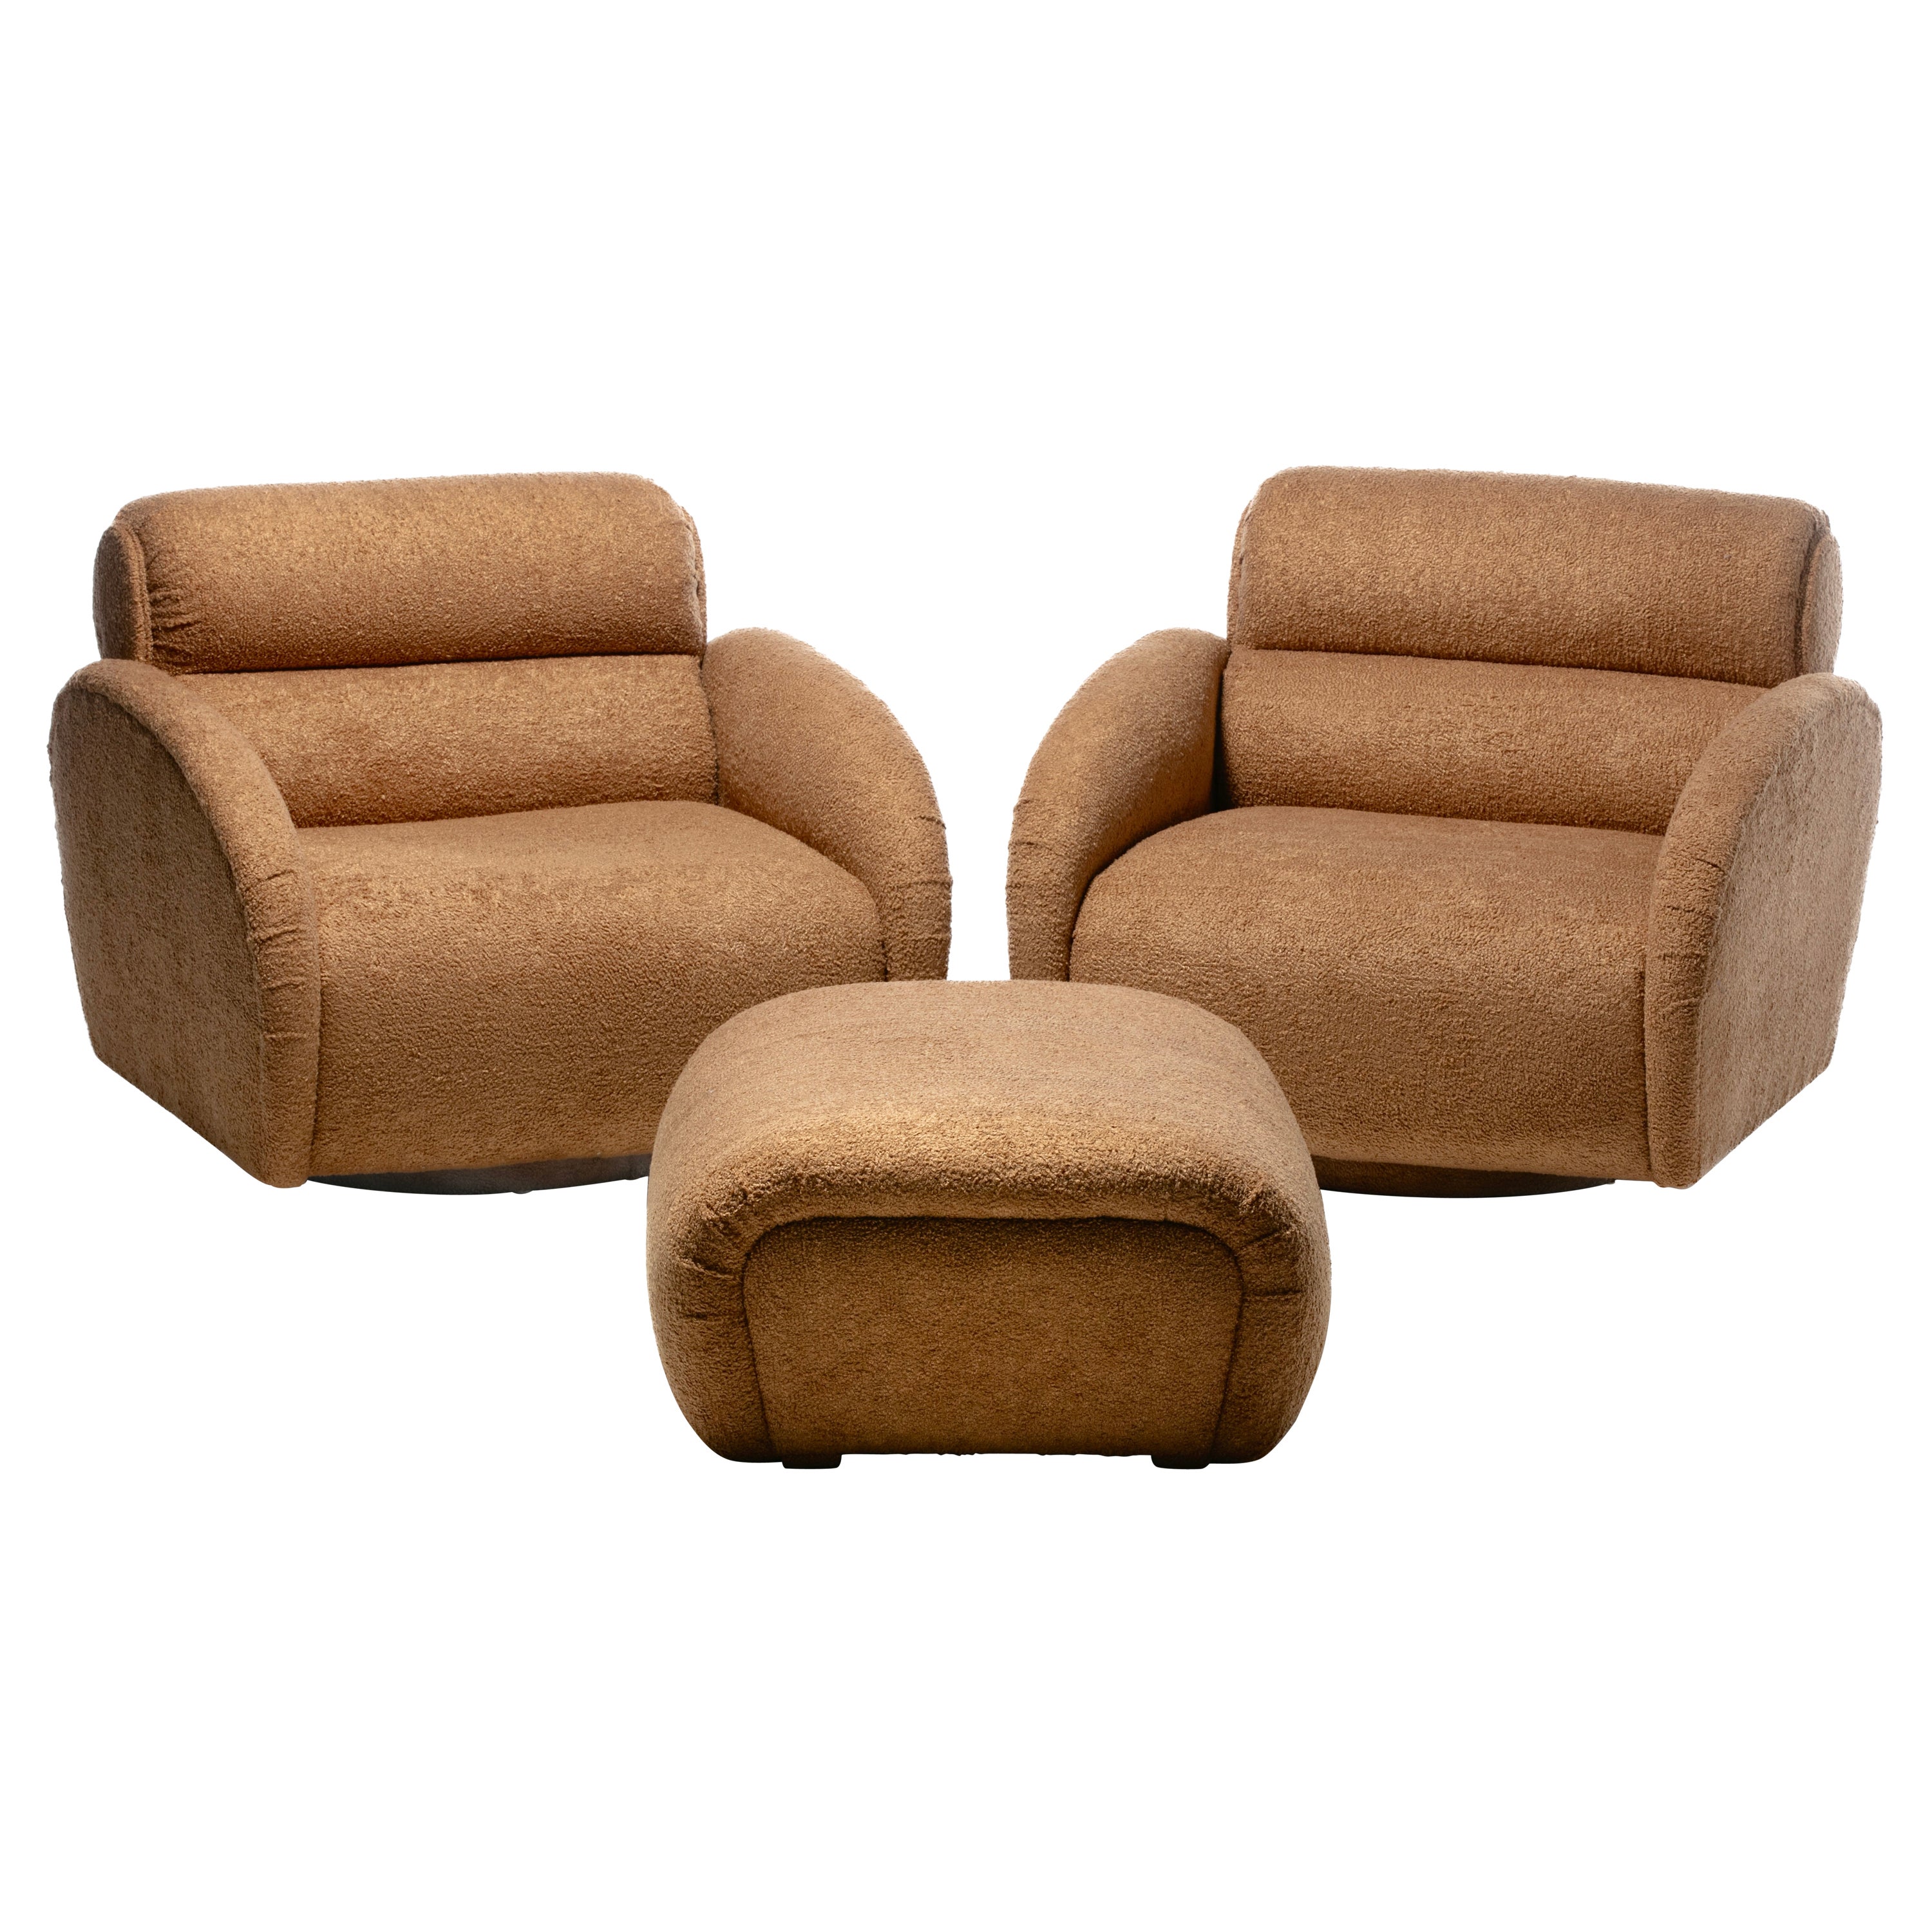 Large Scale Directional Post Modern Swivel Chairs & Ottoman in Mocha Fabric For Sale